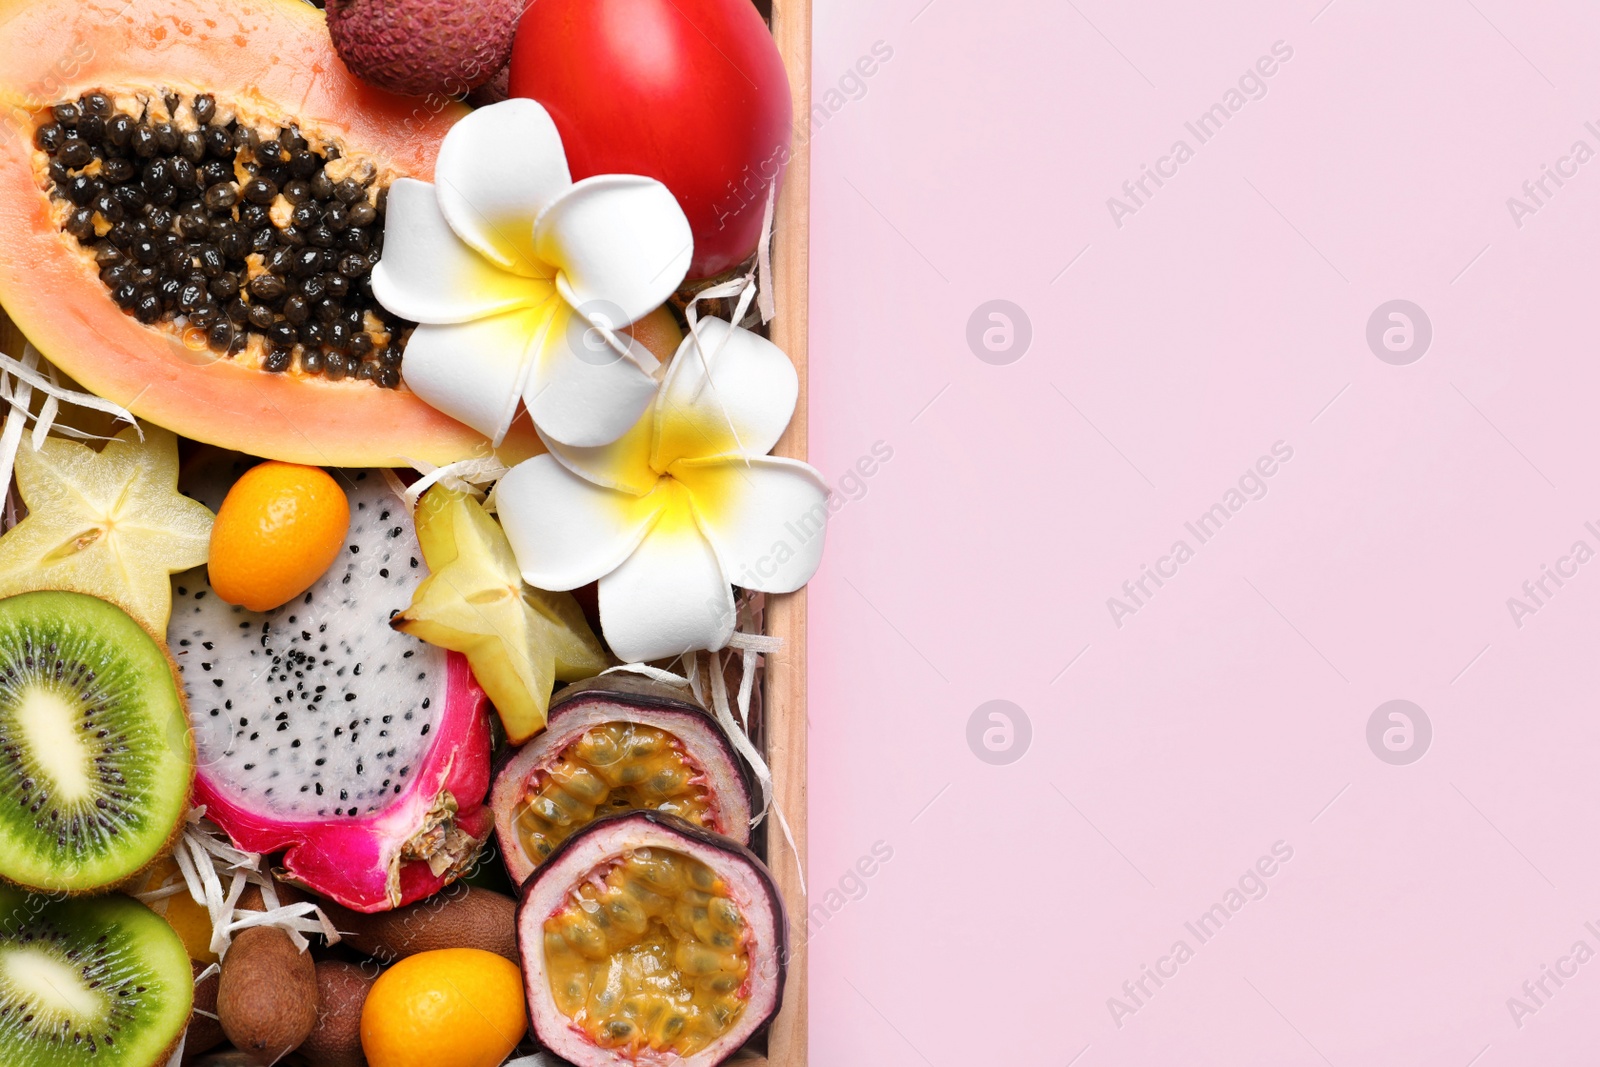 Photo of Different tropical fruits in wooden box on pink background, top view. Space for text